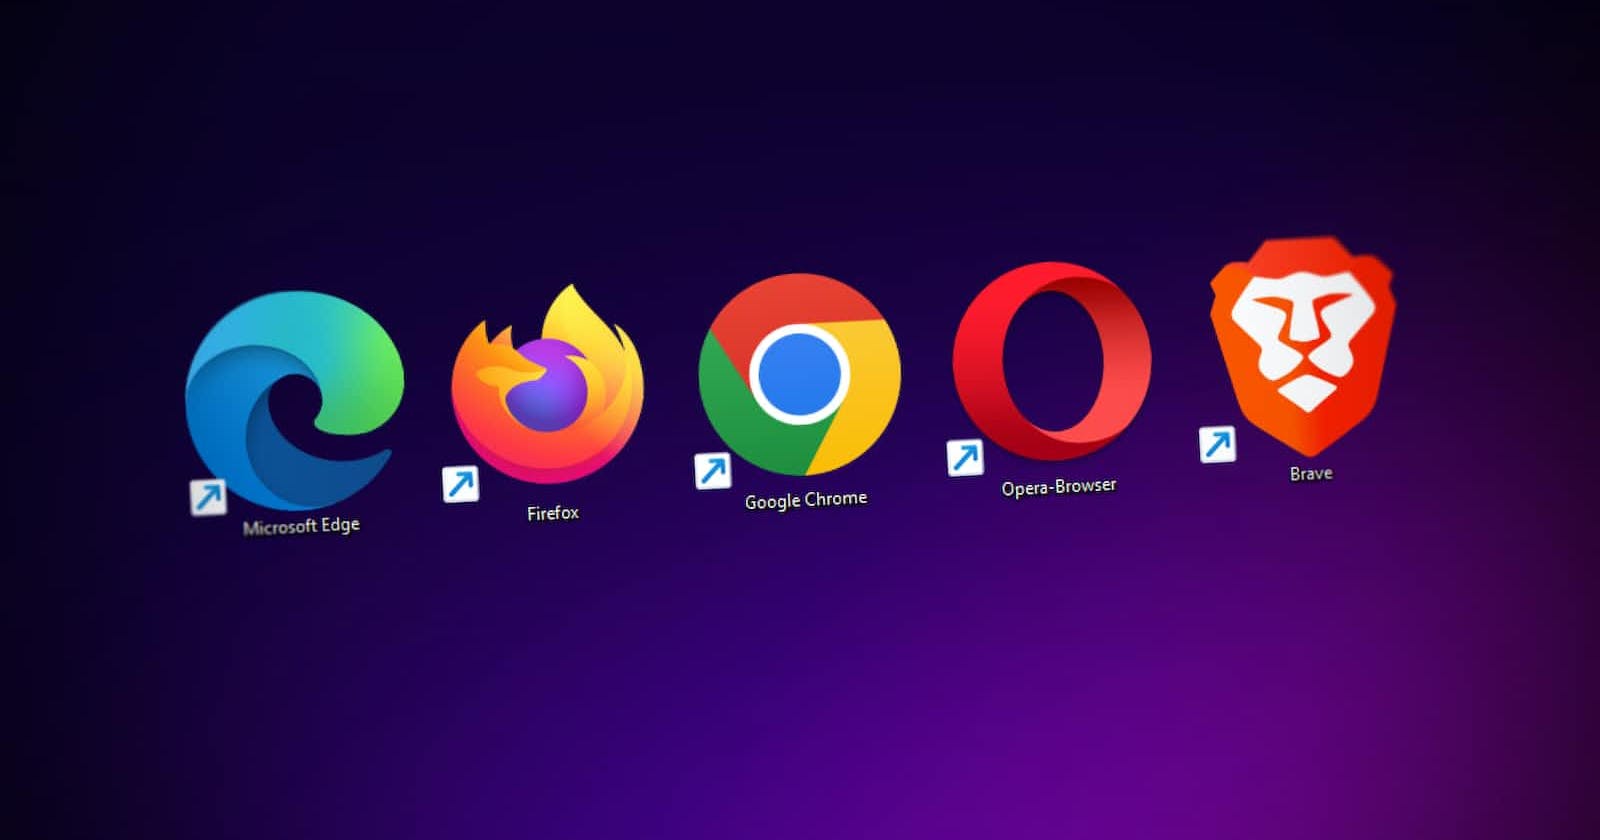 Browser architecture